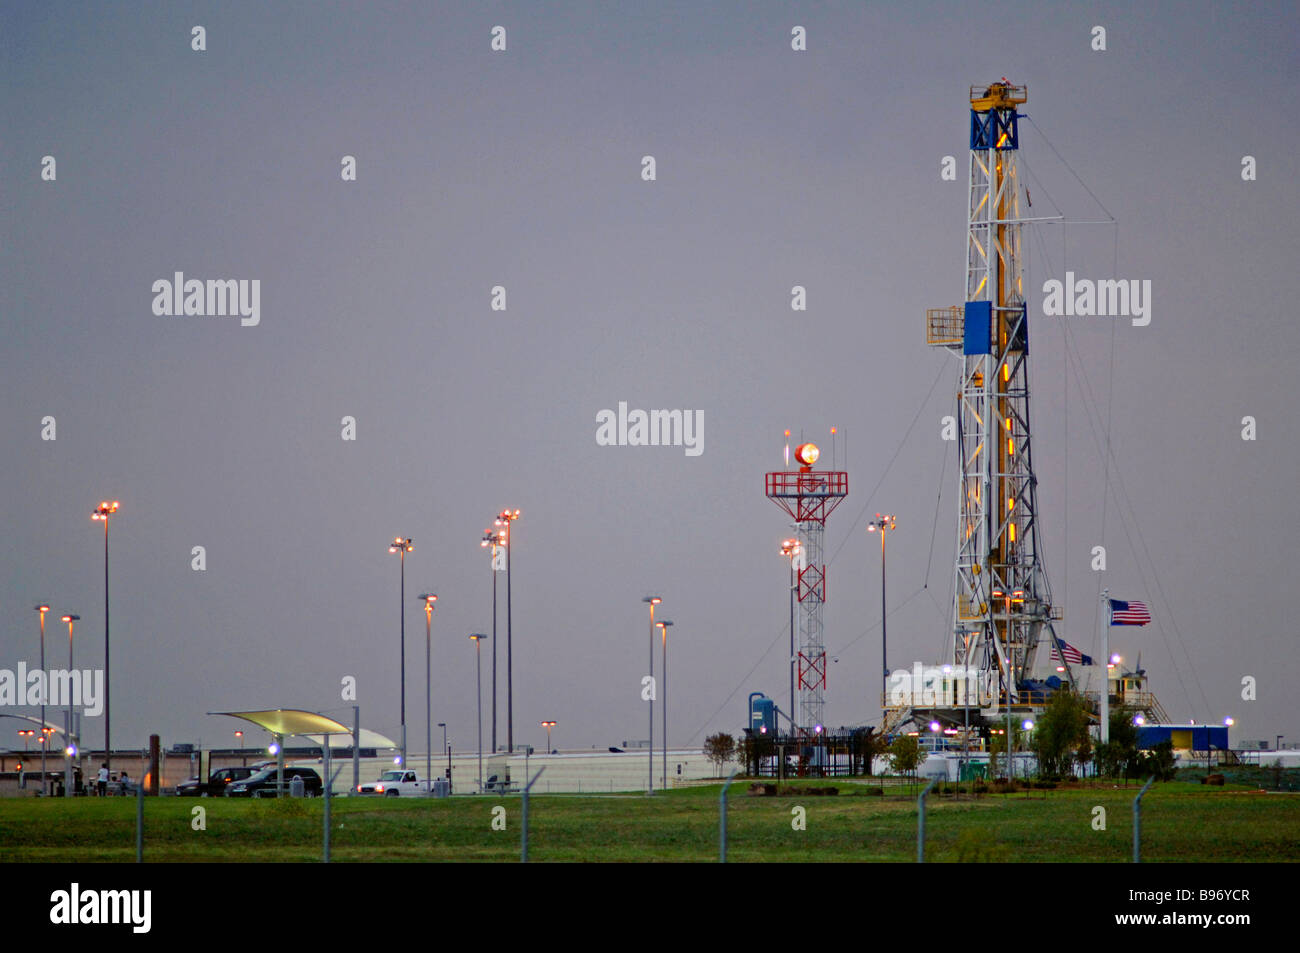 Oil derrick/drilling rig or gas well on public owned airport property signifies the intense search for fossil fuel and energy. Stock Photo